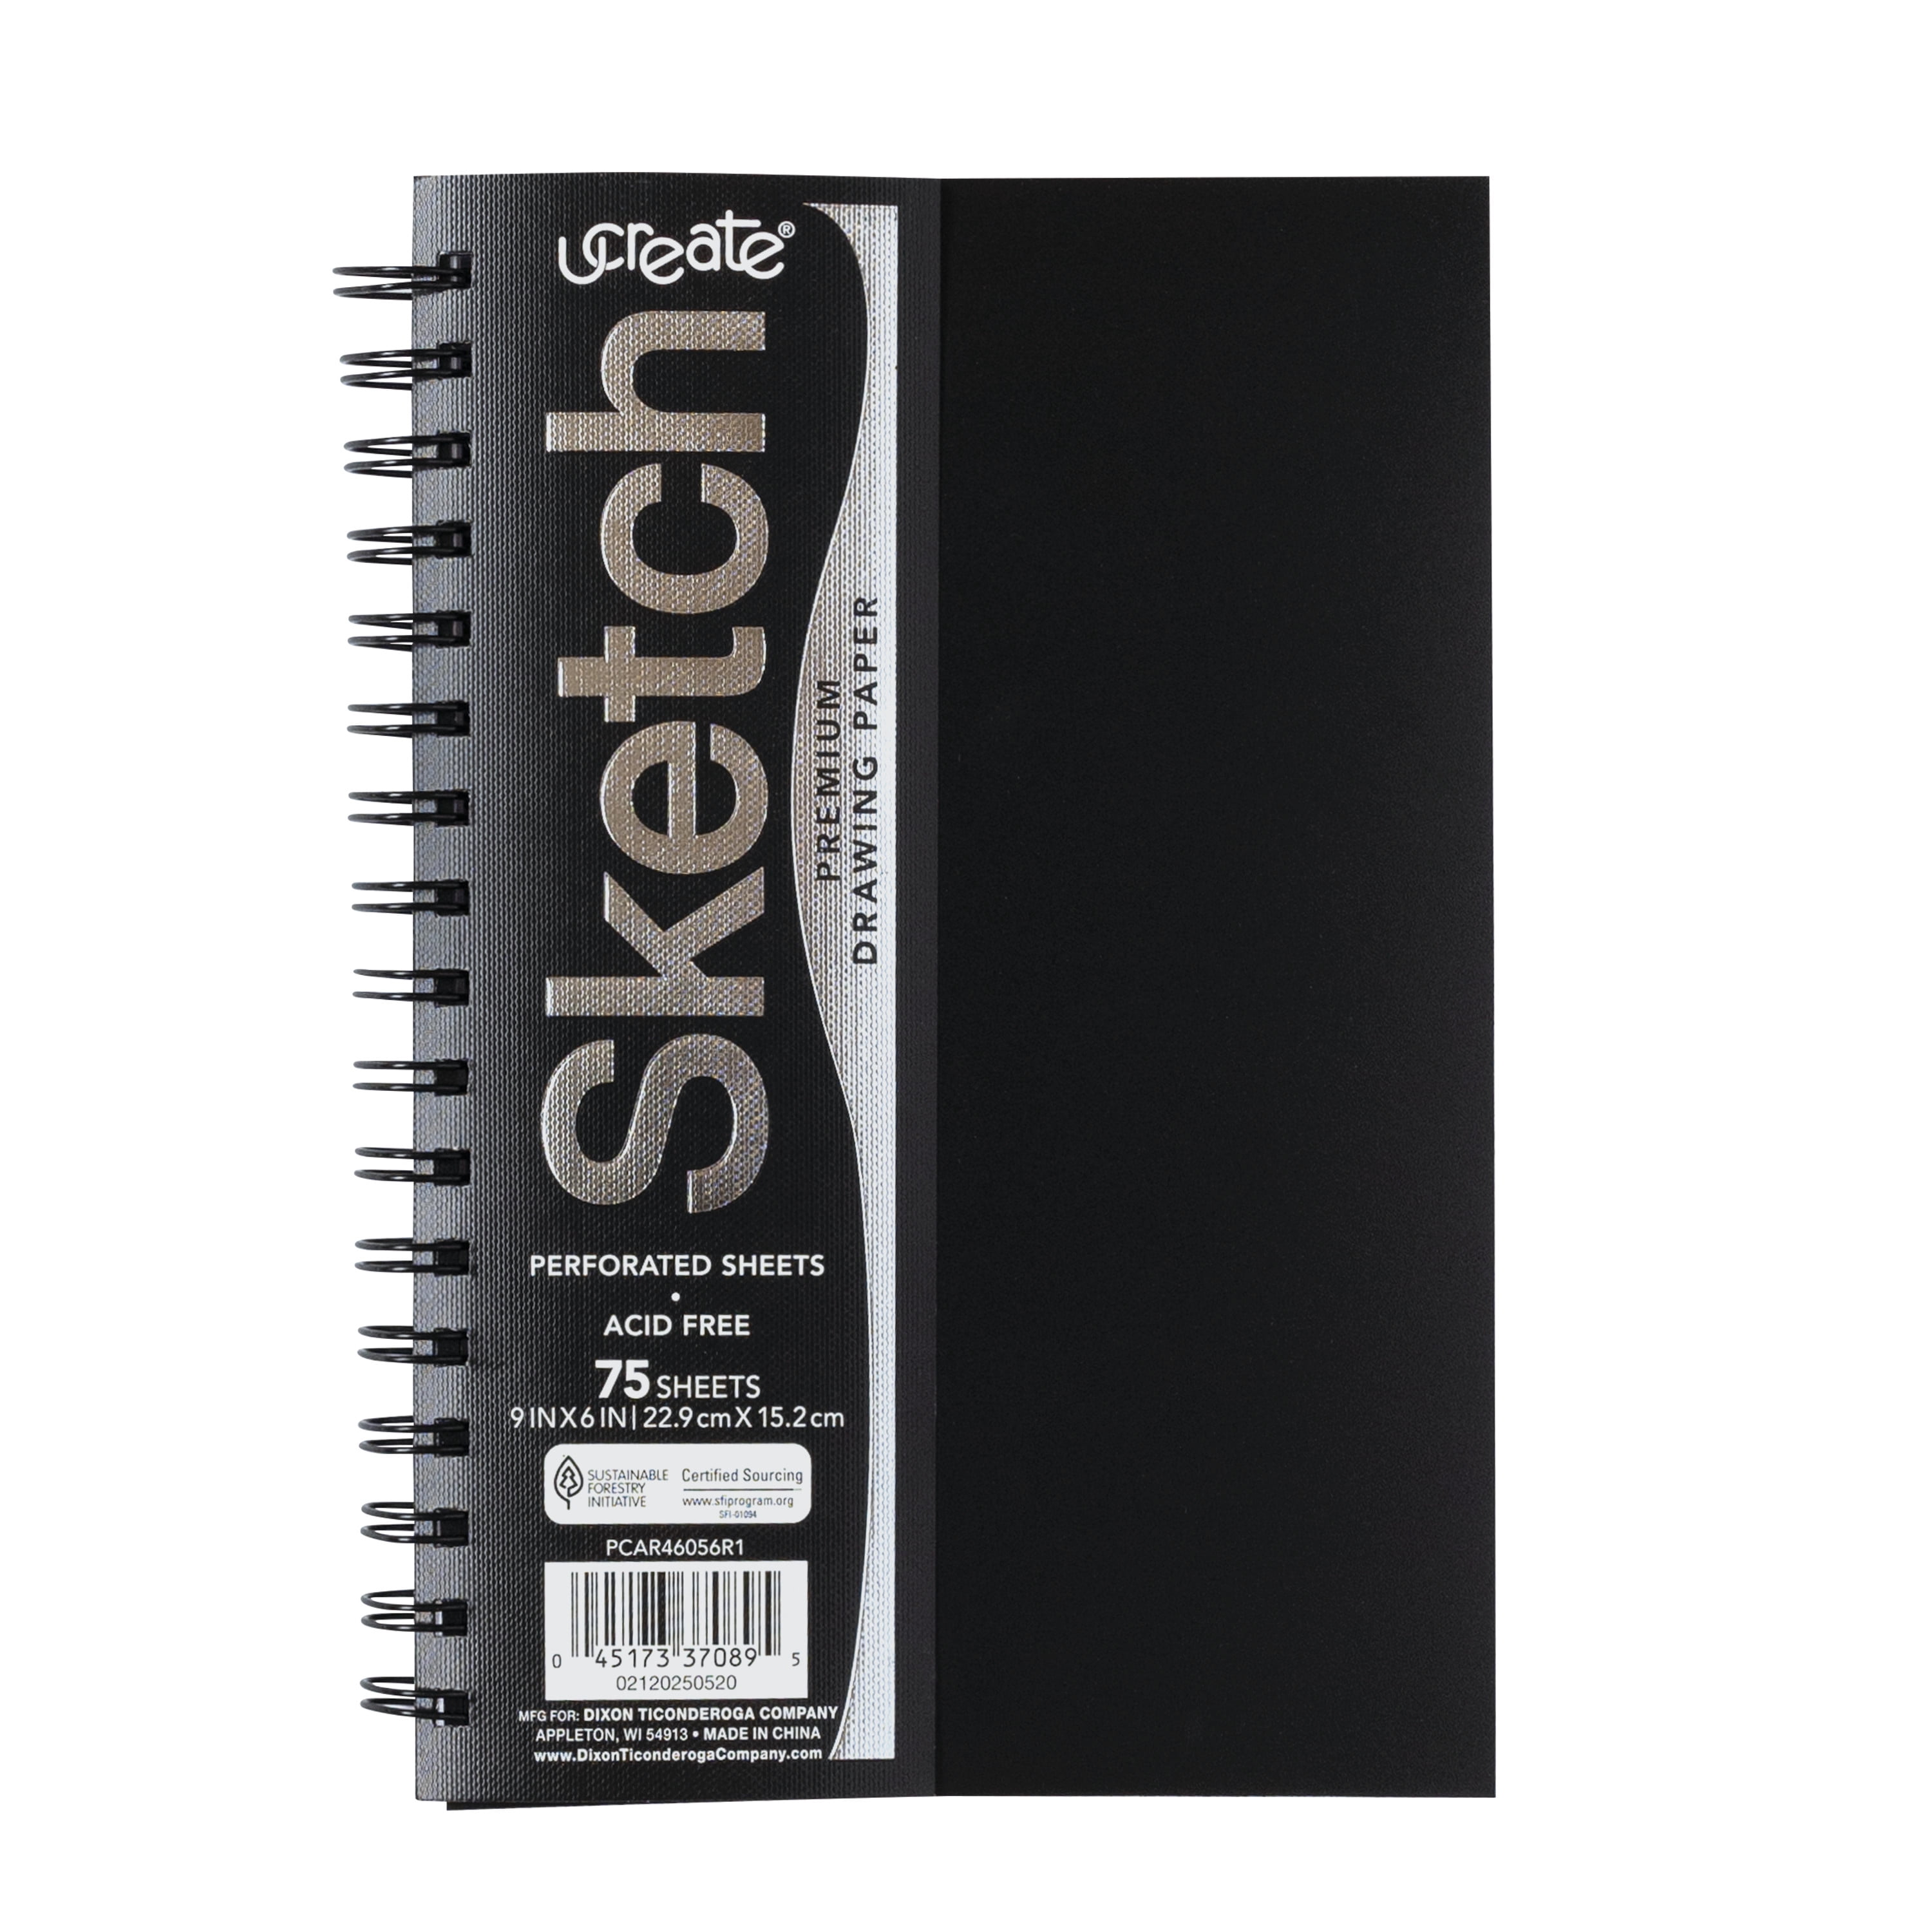 UCreate Poly Cover Sketch Book, Heavyweight, 6 x 9 in, Black, 75 Sheets